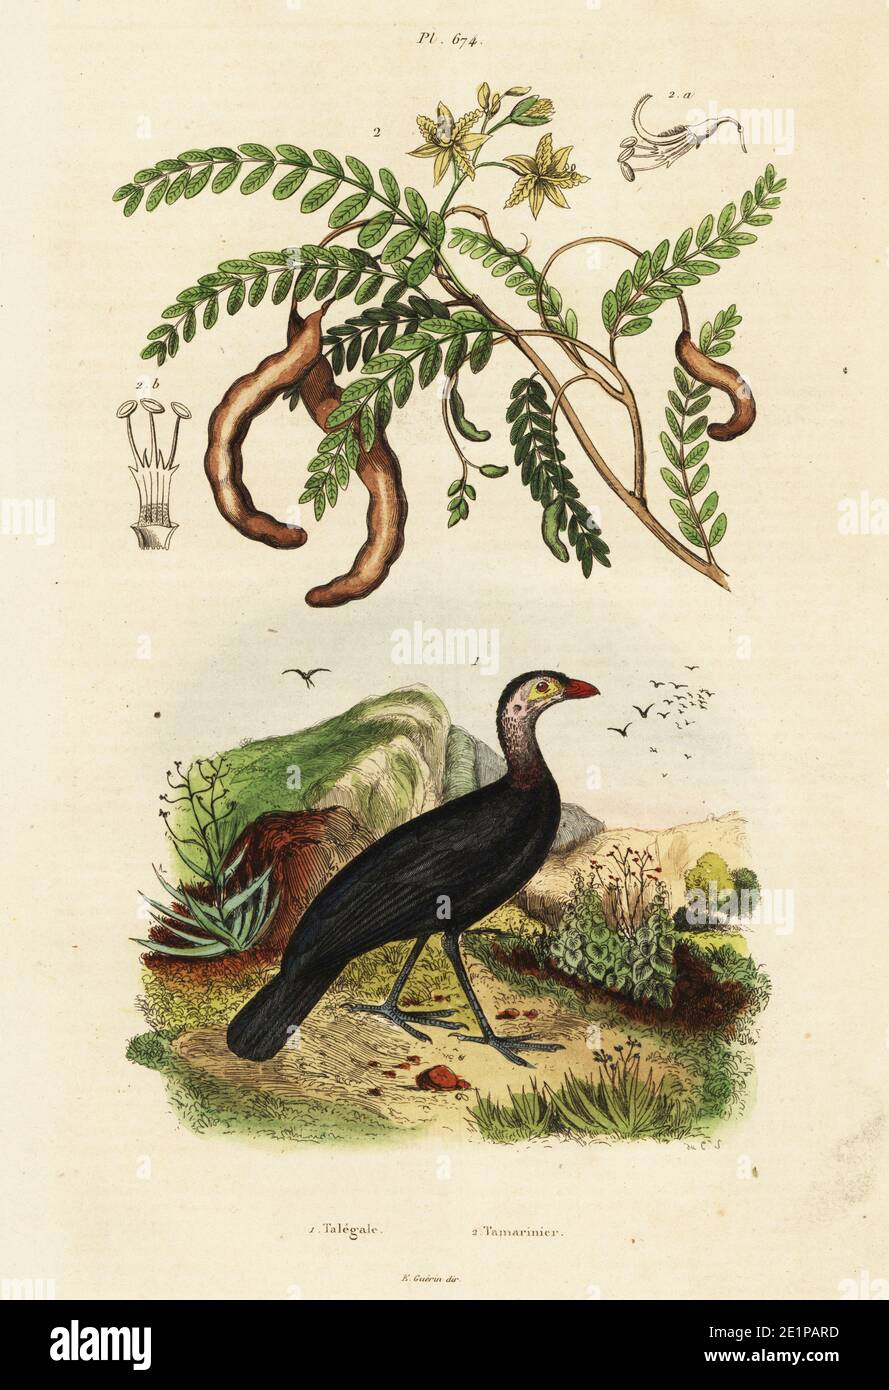 Red-billed brushturkey, Talegalla cuvieri 1, and tamarind, Tamarindus indica 2. Talegale, Tamarinier. Handcoloured steel engraving by du Casse from Felix-Edouard Guerin-Meneville's Dictionnaire Pittoresque d'Histoire Naturelle (Picturesque Dictionary of Natural History), Paris, 1834-39. Stock Photo